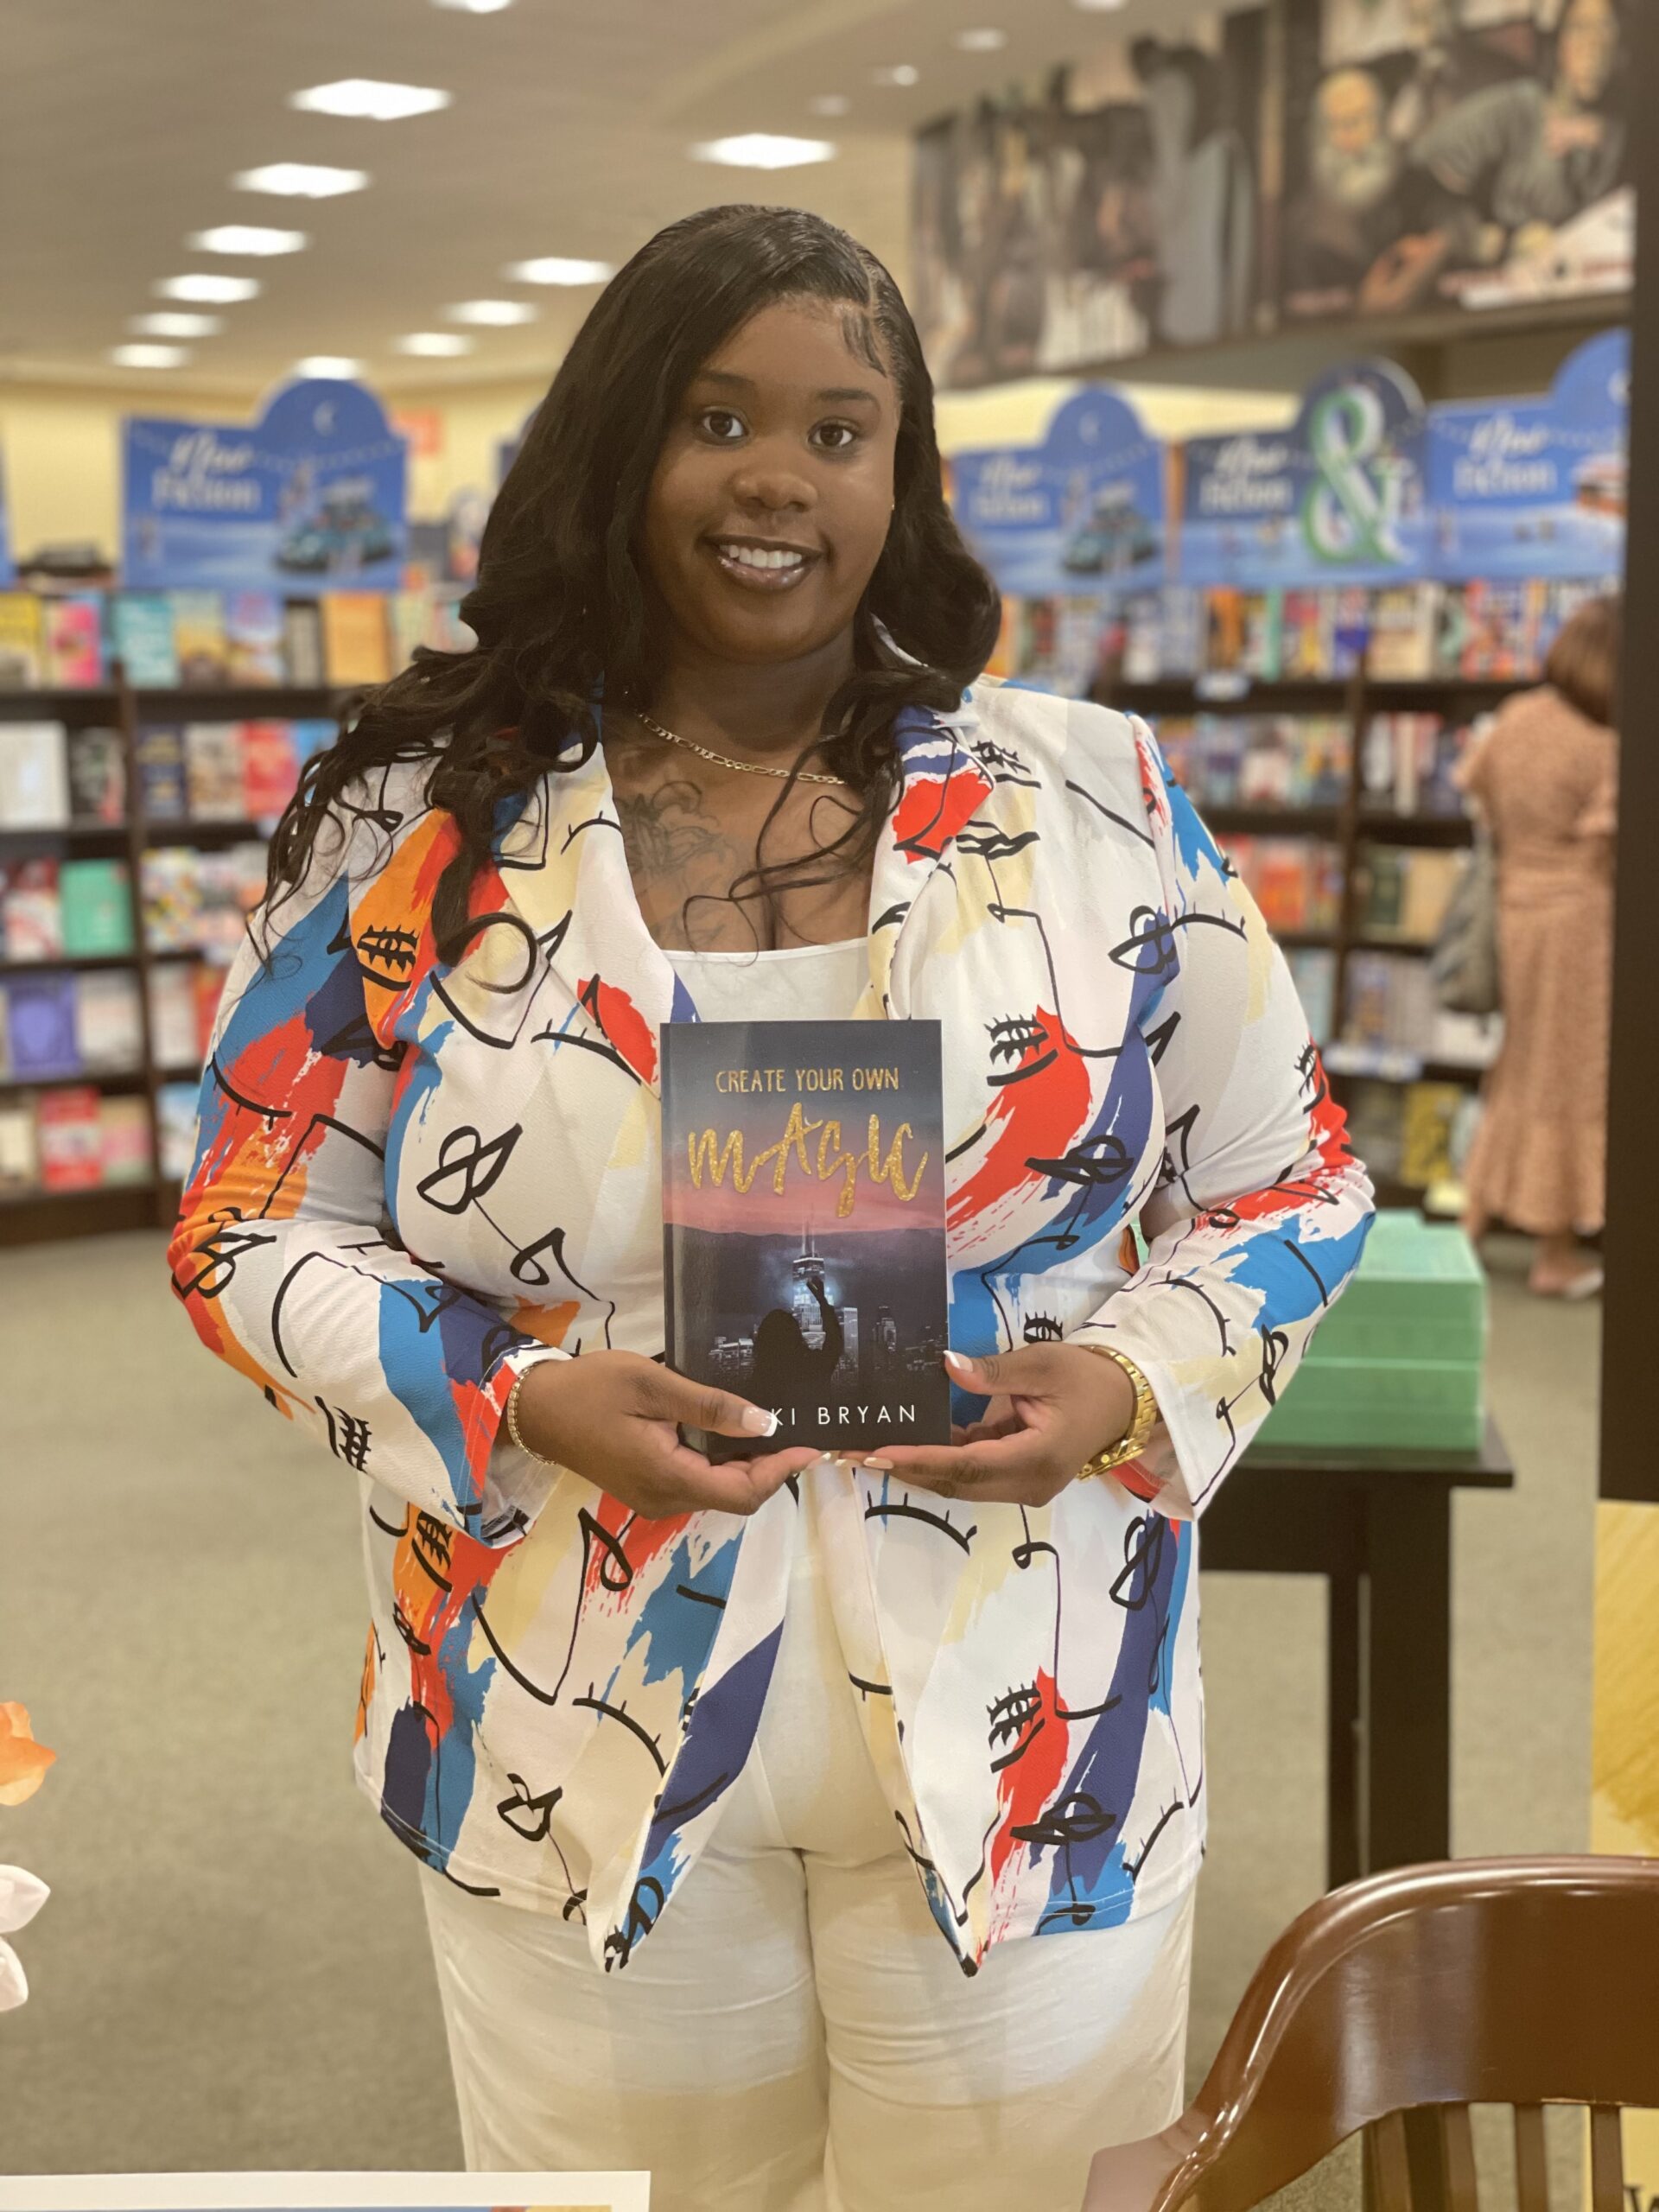 Author Nikki B Book Signing at Barnes & Noble